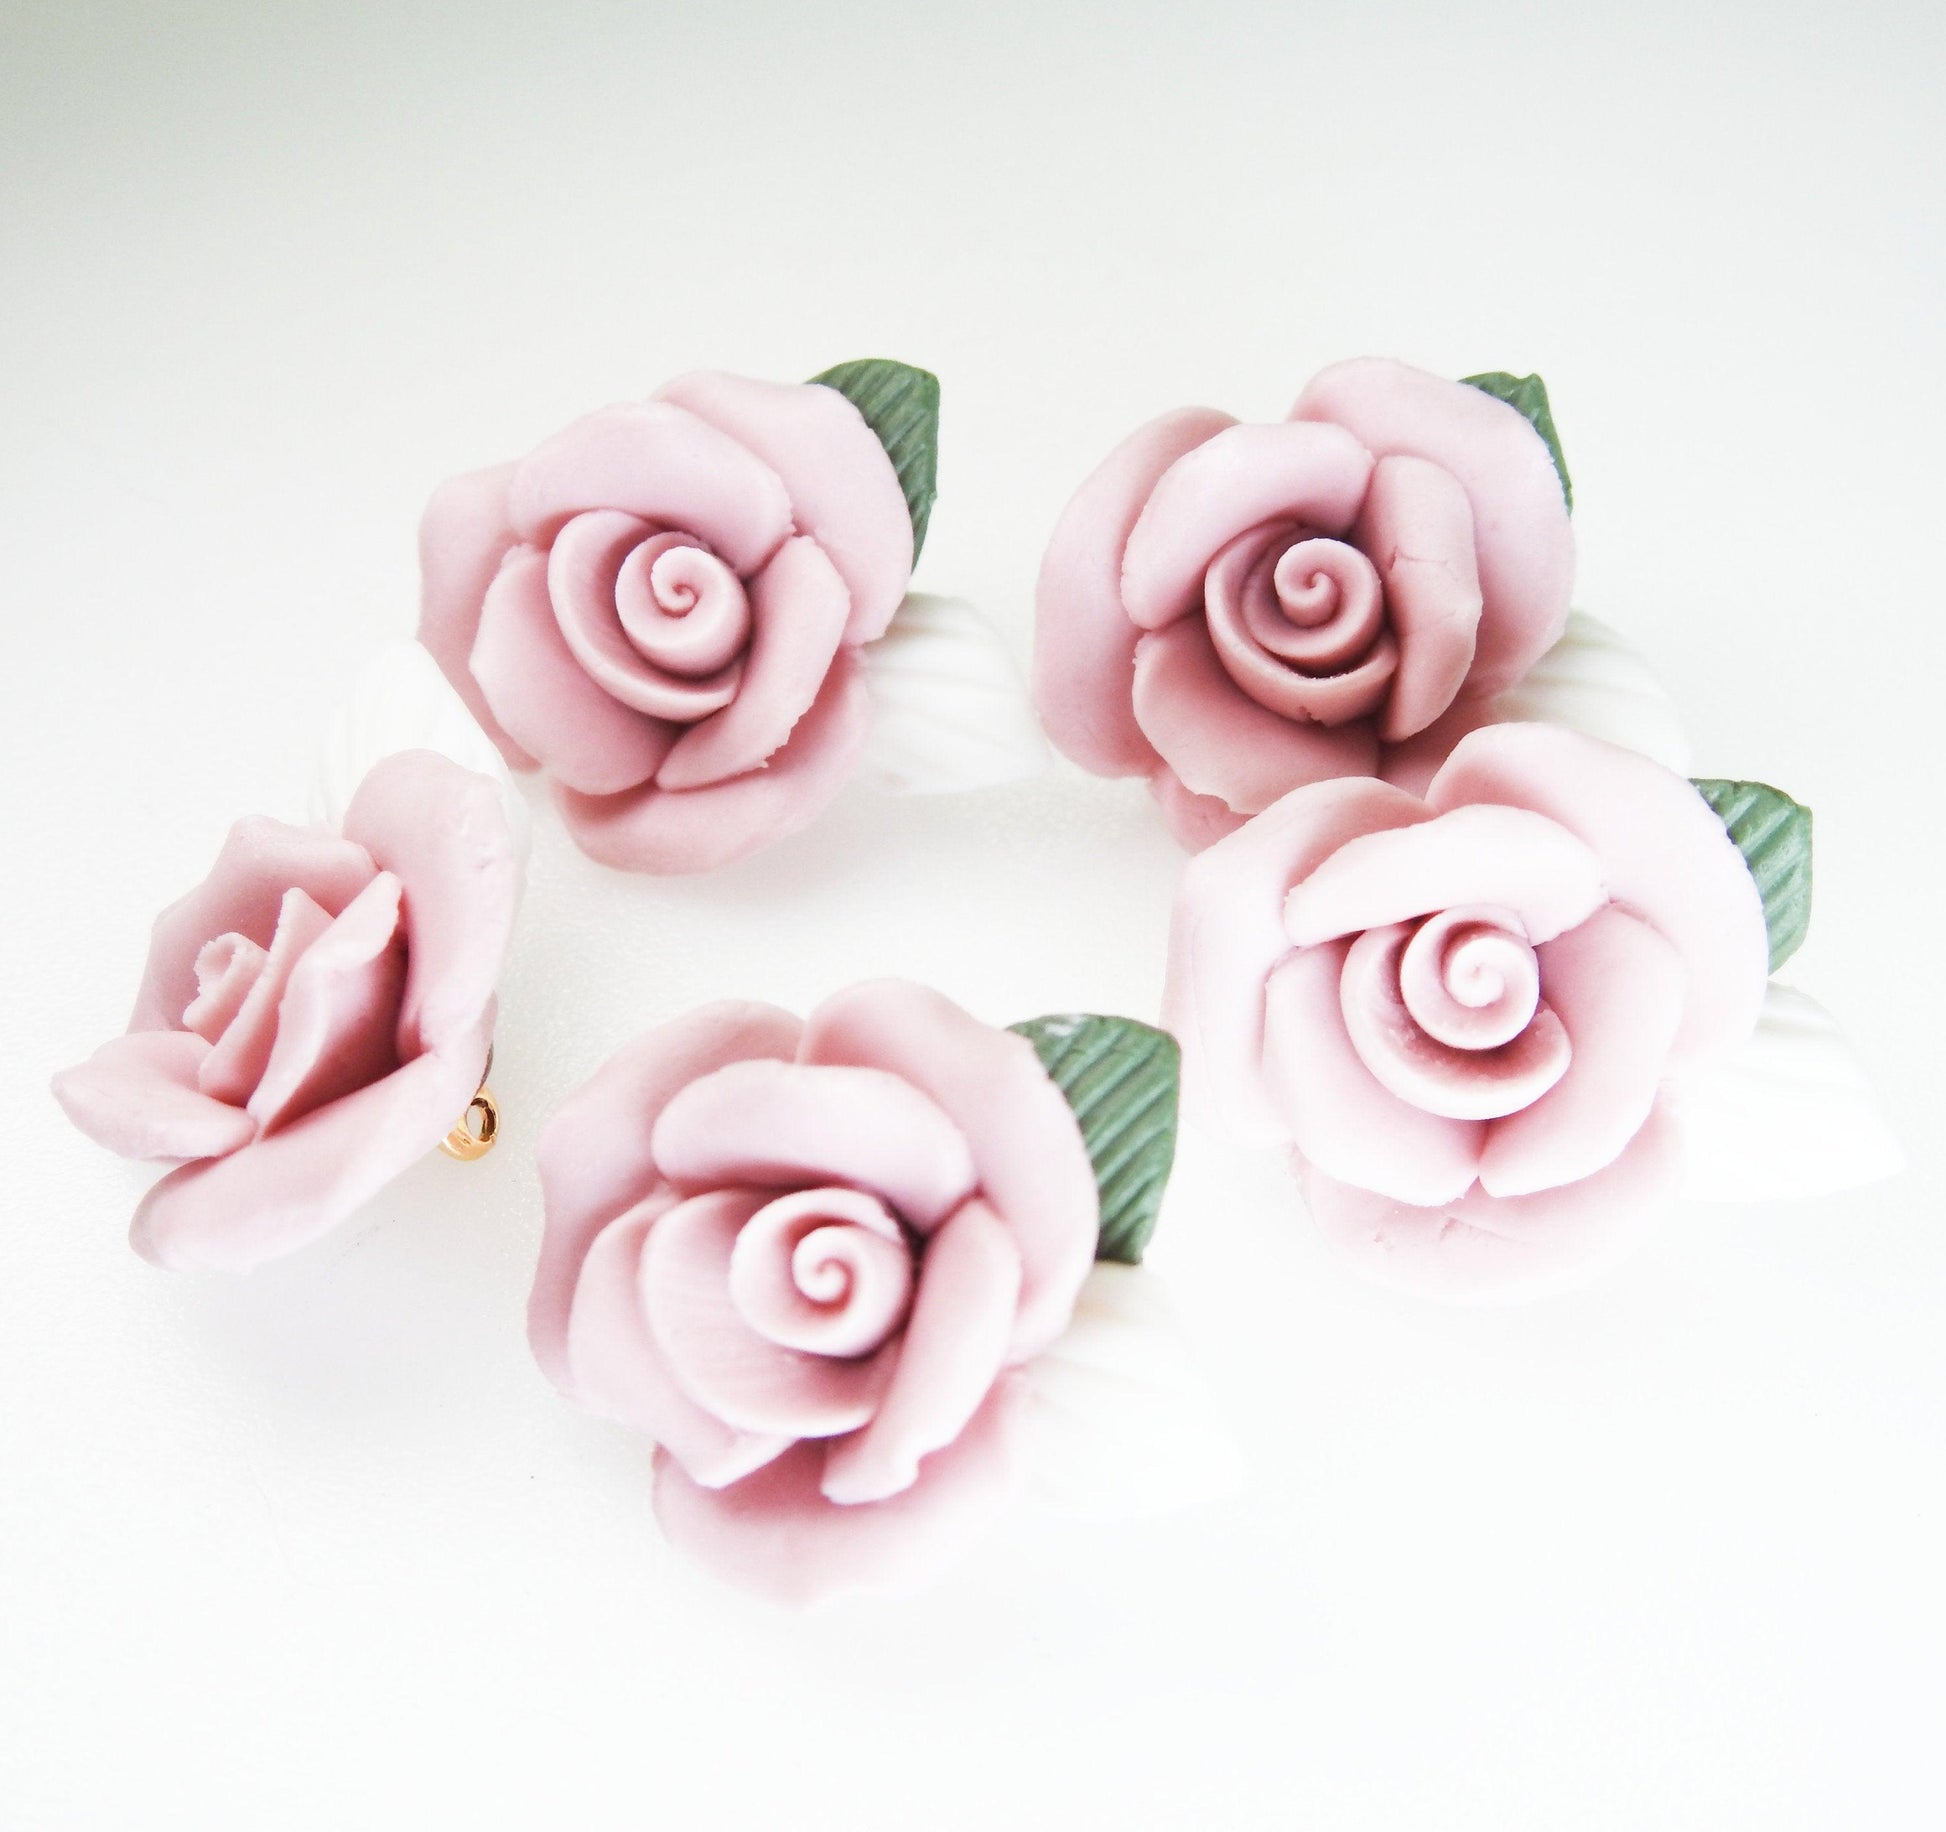 Dusty rose floral buttons